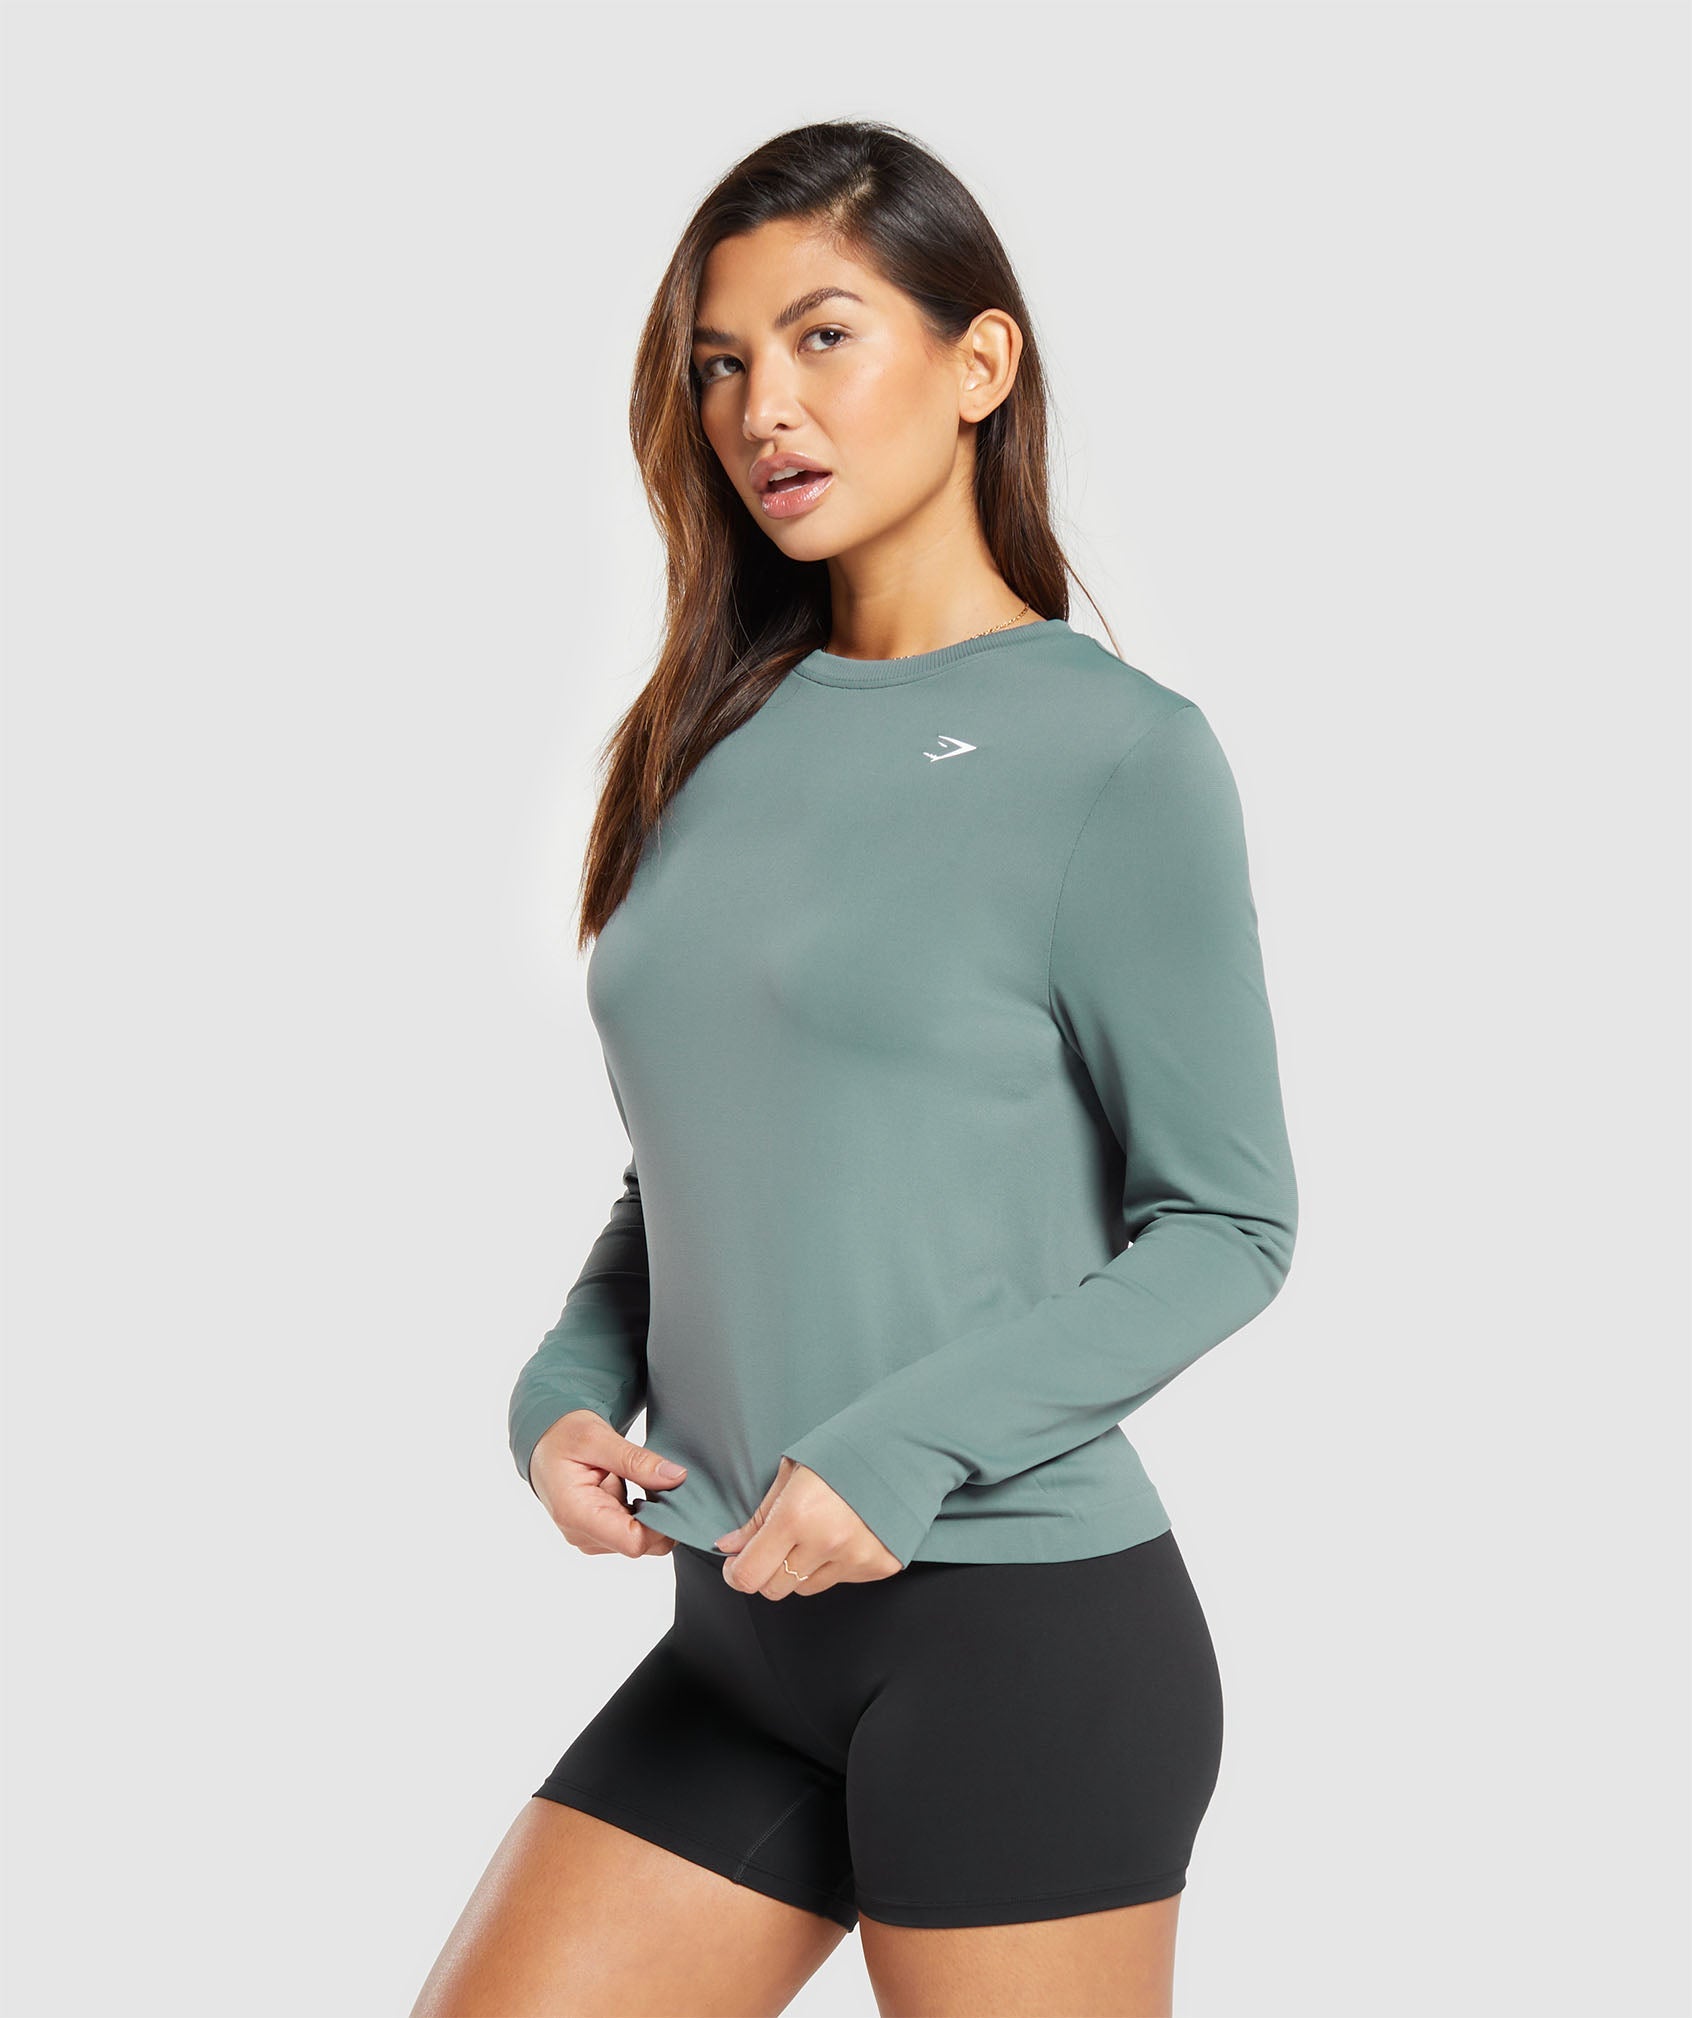 Everyday Seamless Long Sleeve Top in Cargo Teal - view 3